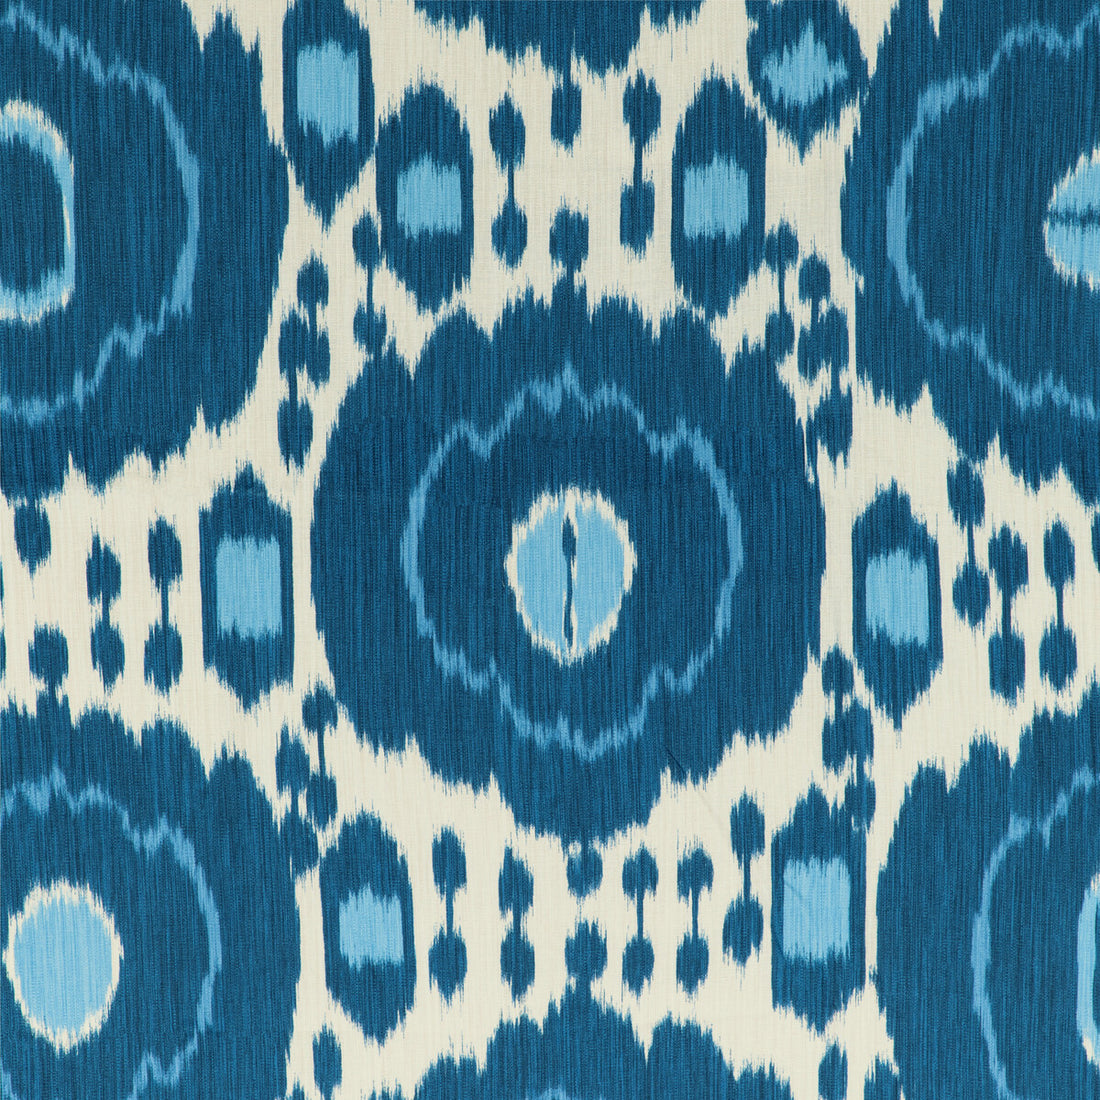 Mayenne Print fabric in blue color - pattern 8020125.5.0 - by Brunschwig &amp; Fils in the Louverne collection